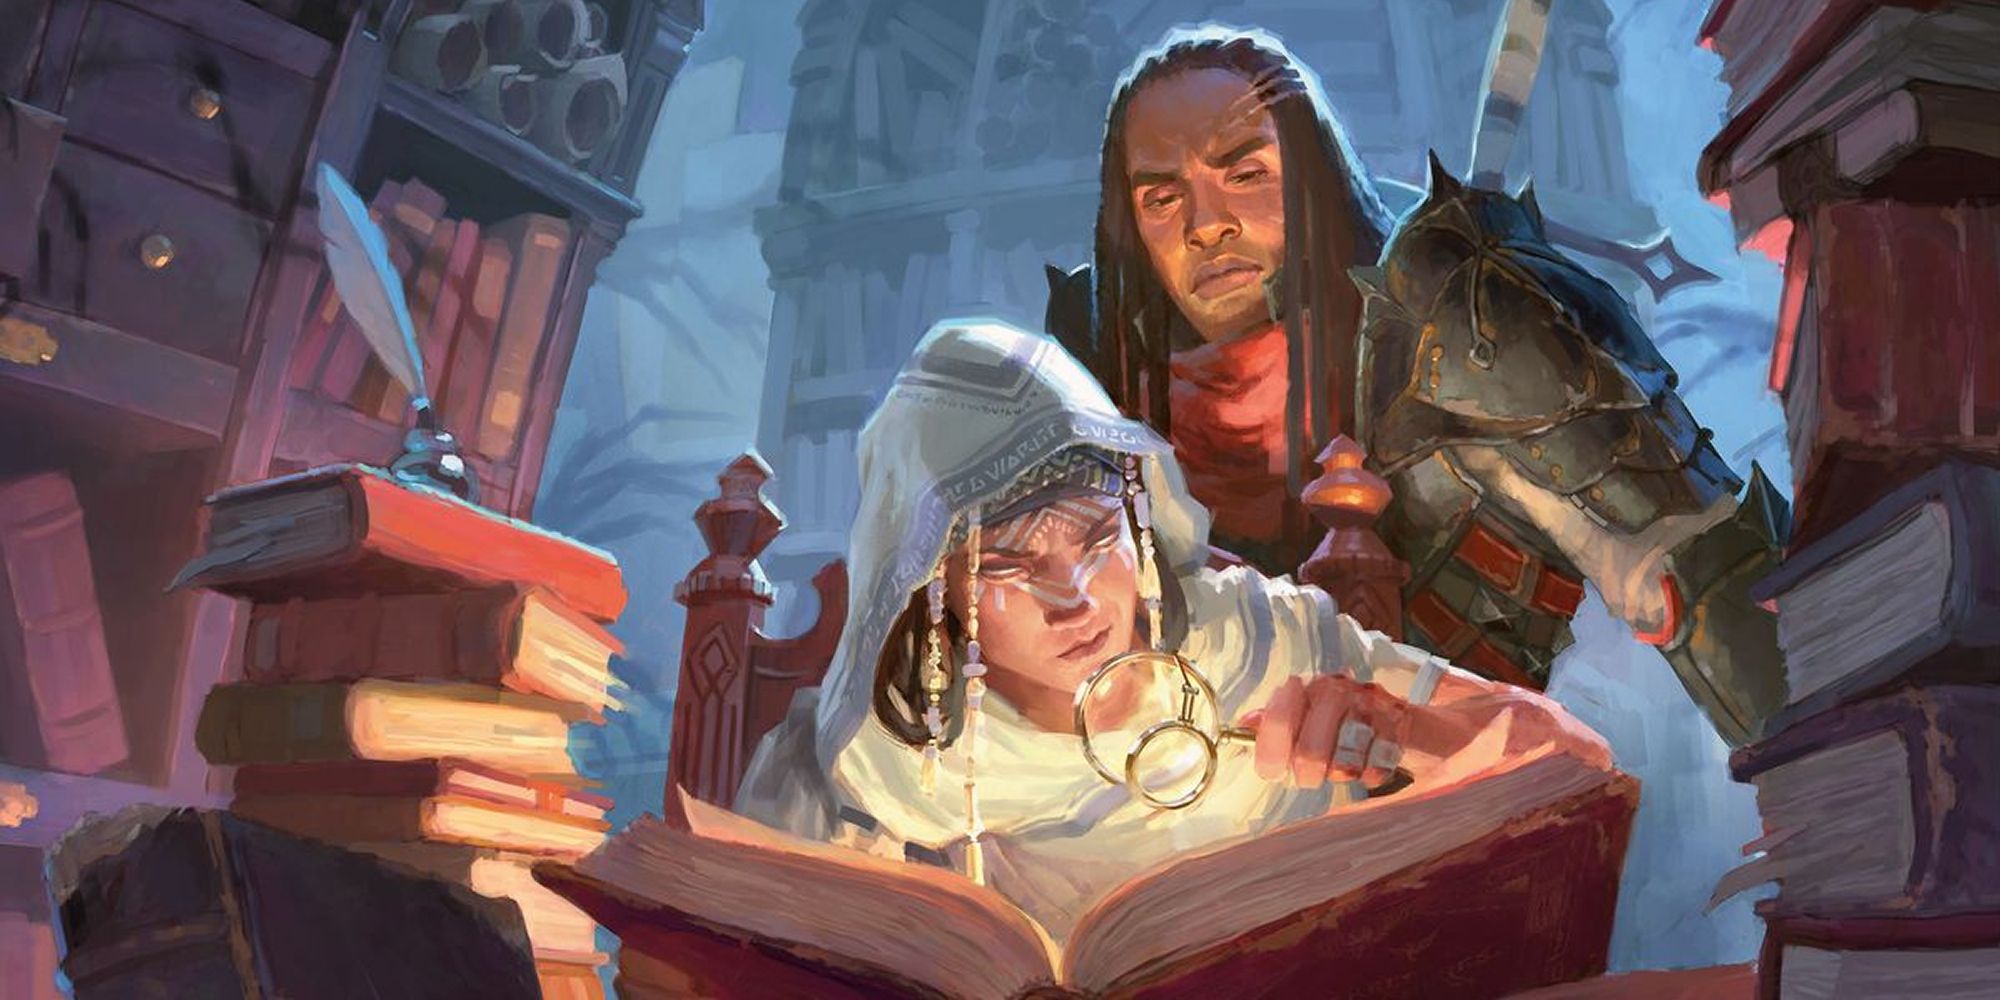 A Spellcaster And Companion Read Through Tomes